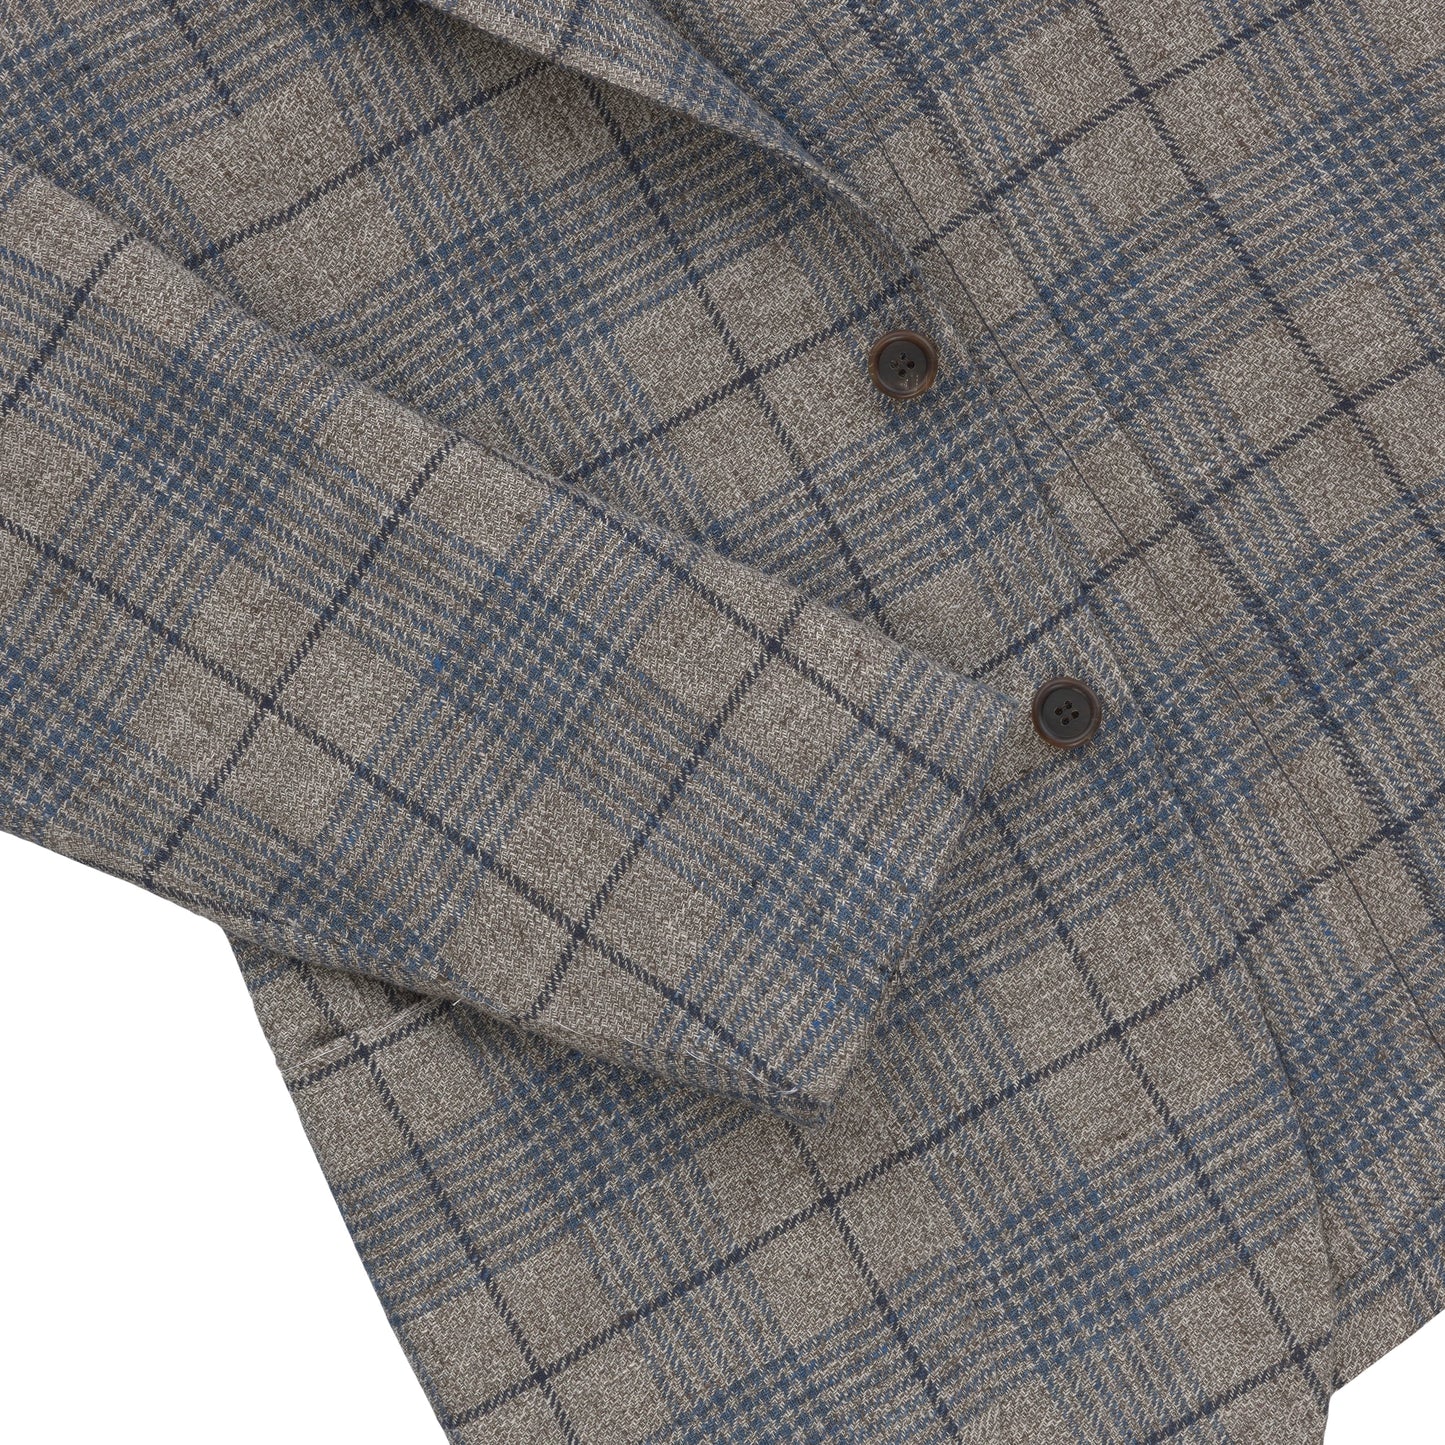 Orazio Luciano Linen - Wool Plaid Jacket in Blue and Brown - SARTALE